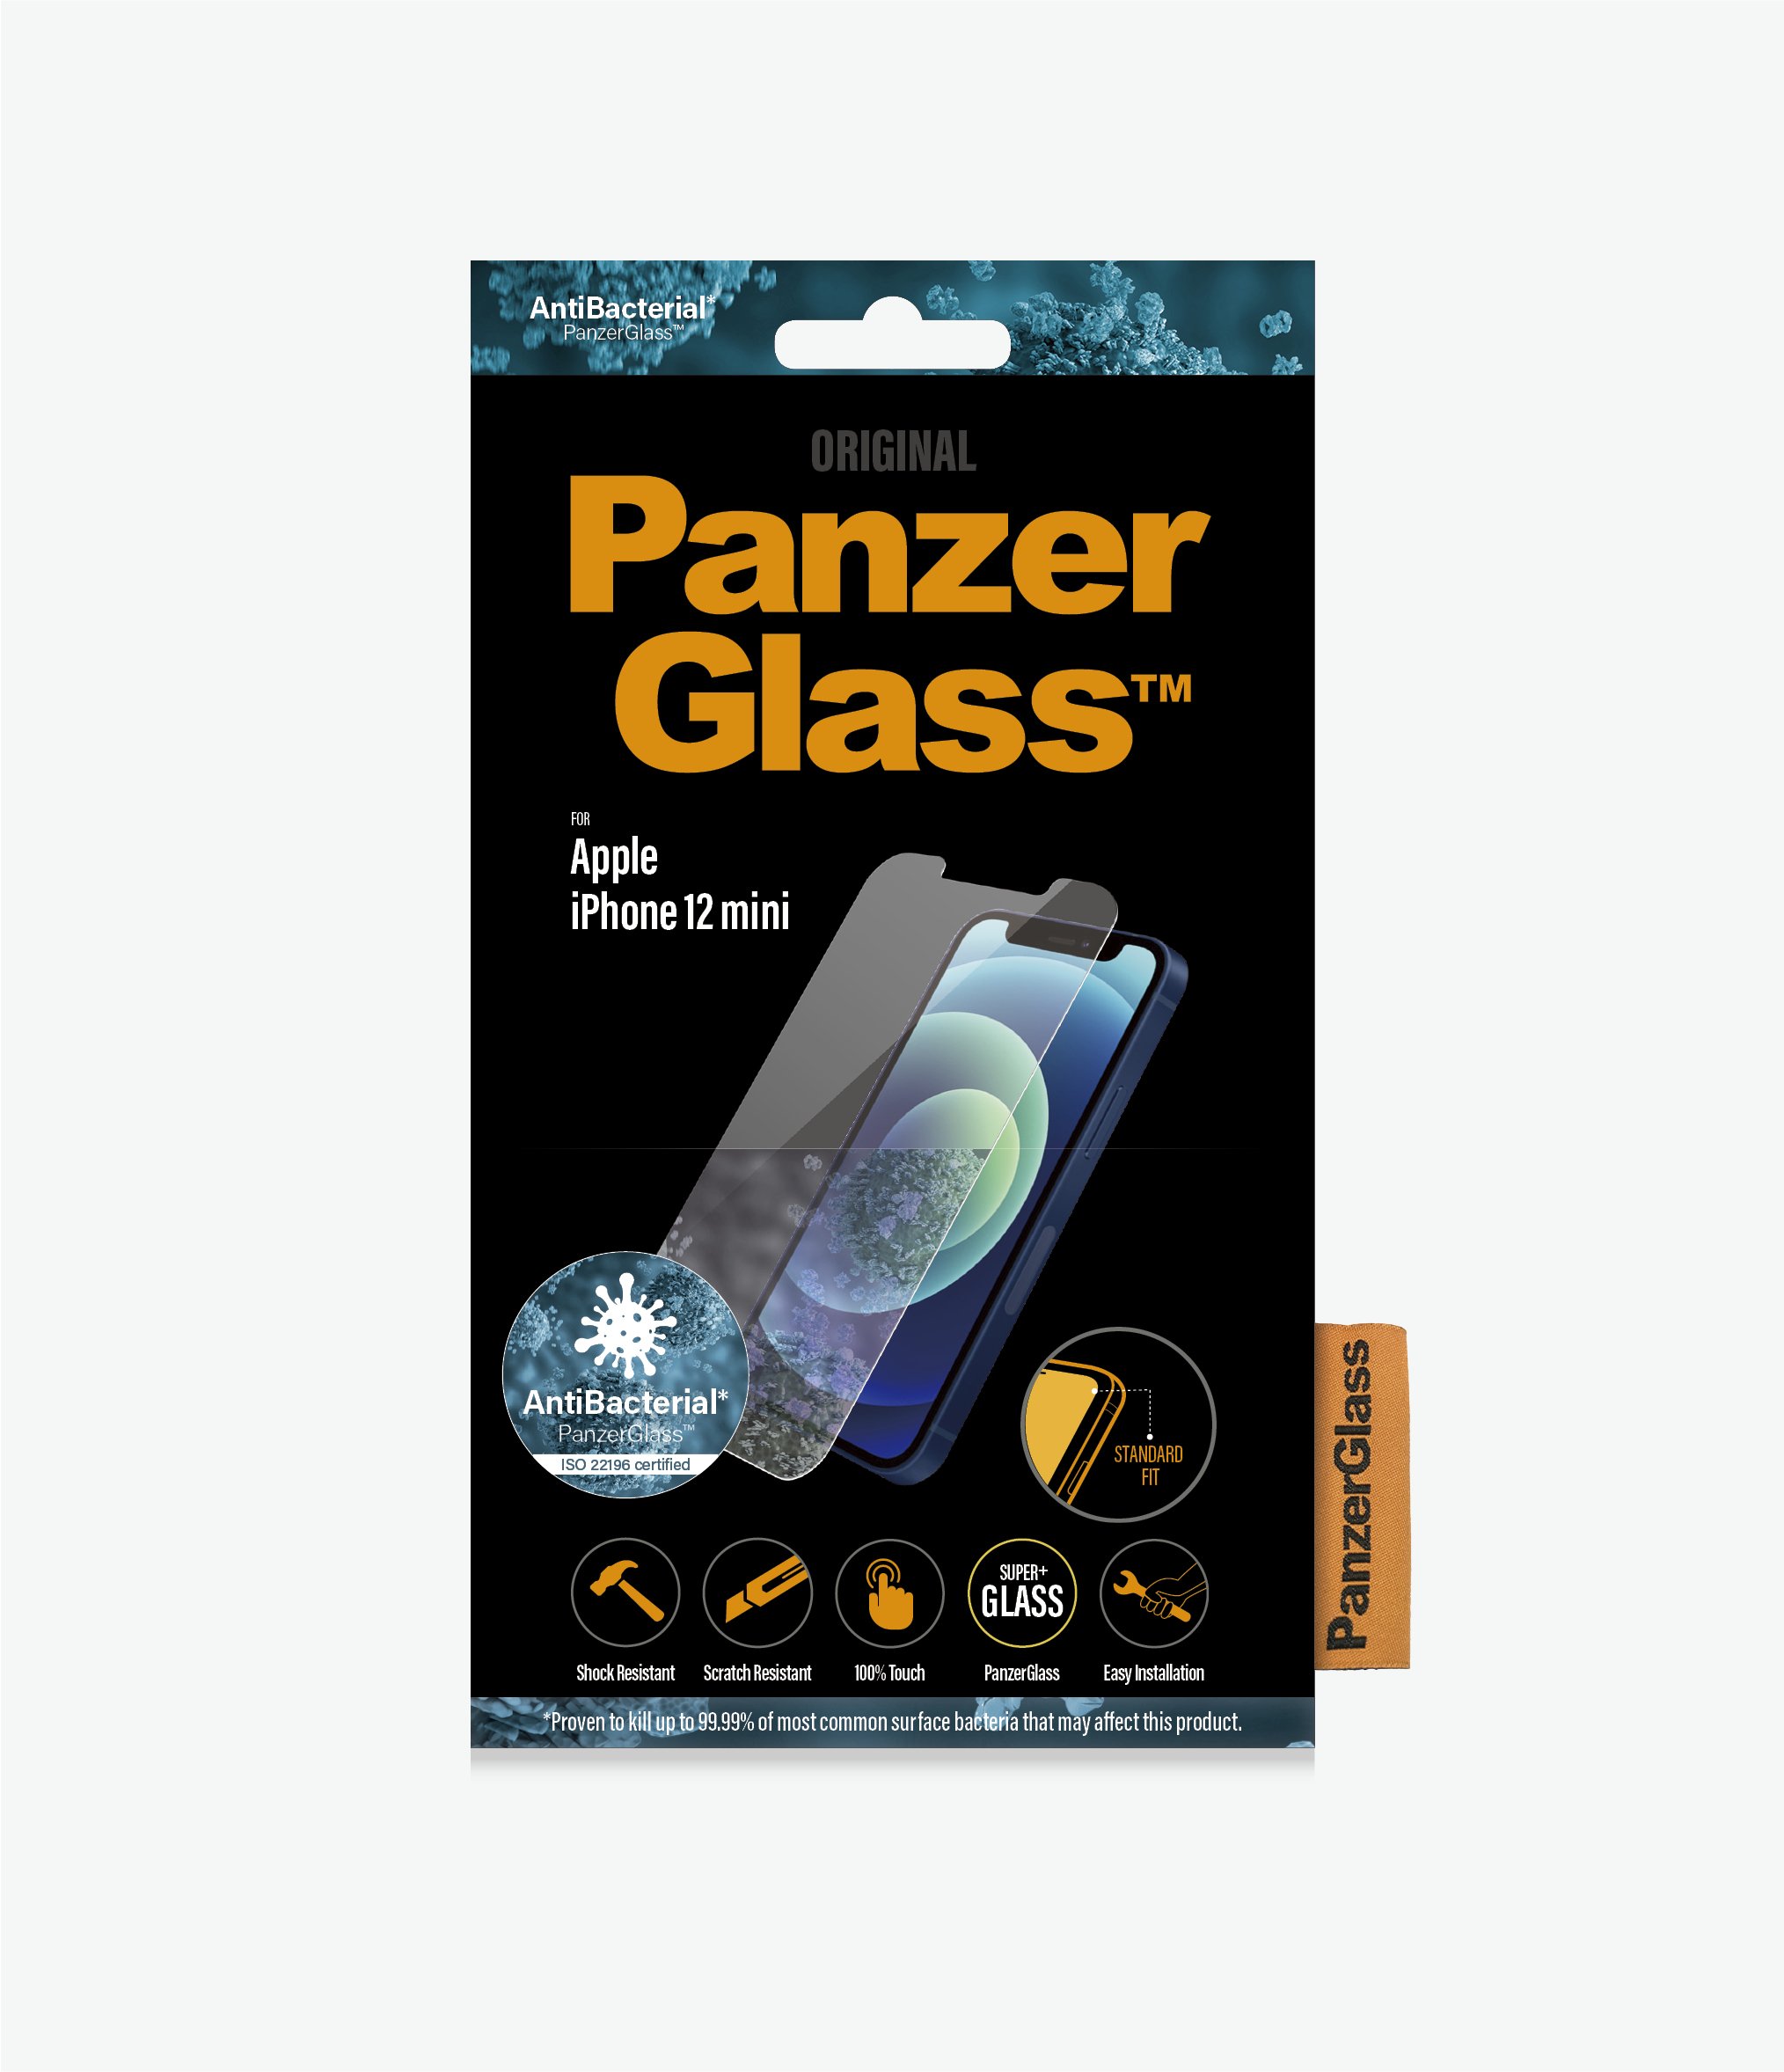 PanzerGlass™ Apple iPhone 12 Mini - (2707) - Screen Protector -  Antibacterial glass, Resistant to scratches and bacteria, Shock absorbing, 100% touch